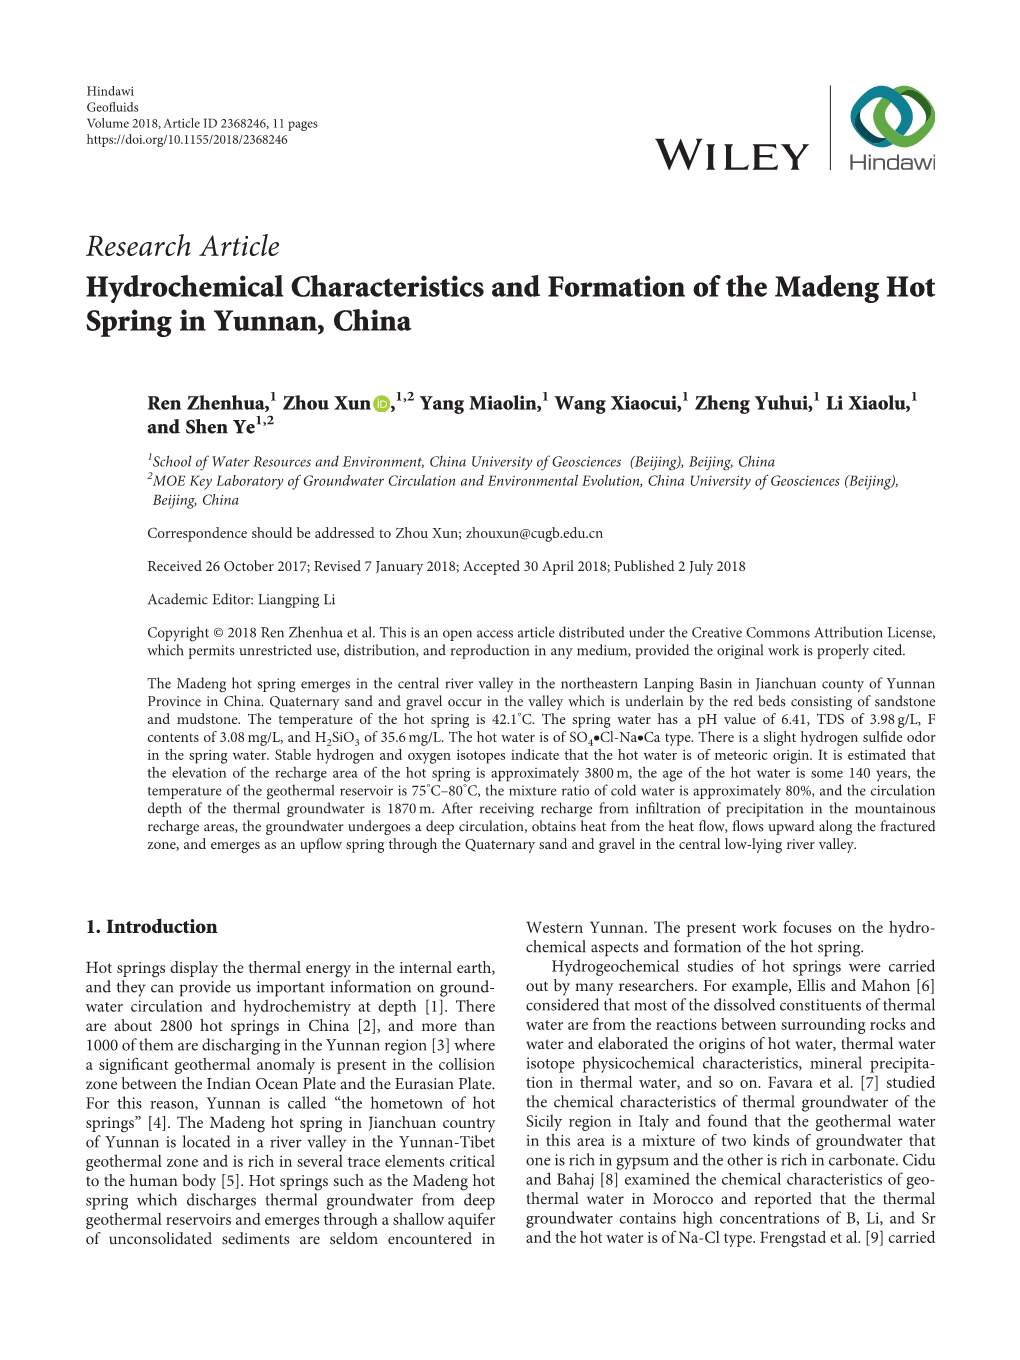 Hydrochemical Characteristics and Formation of the Madeng Hot Spring in Yunnan, China